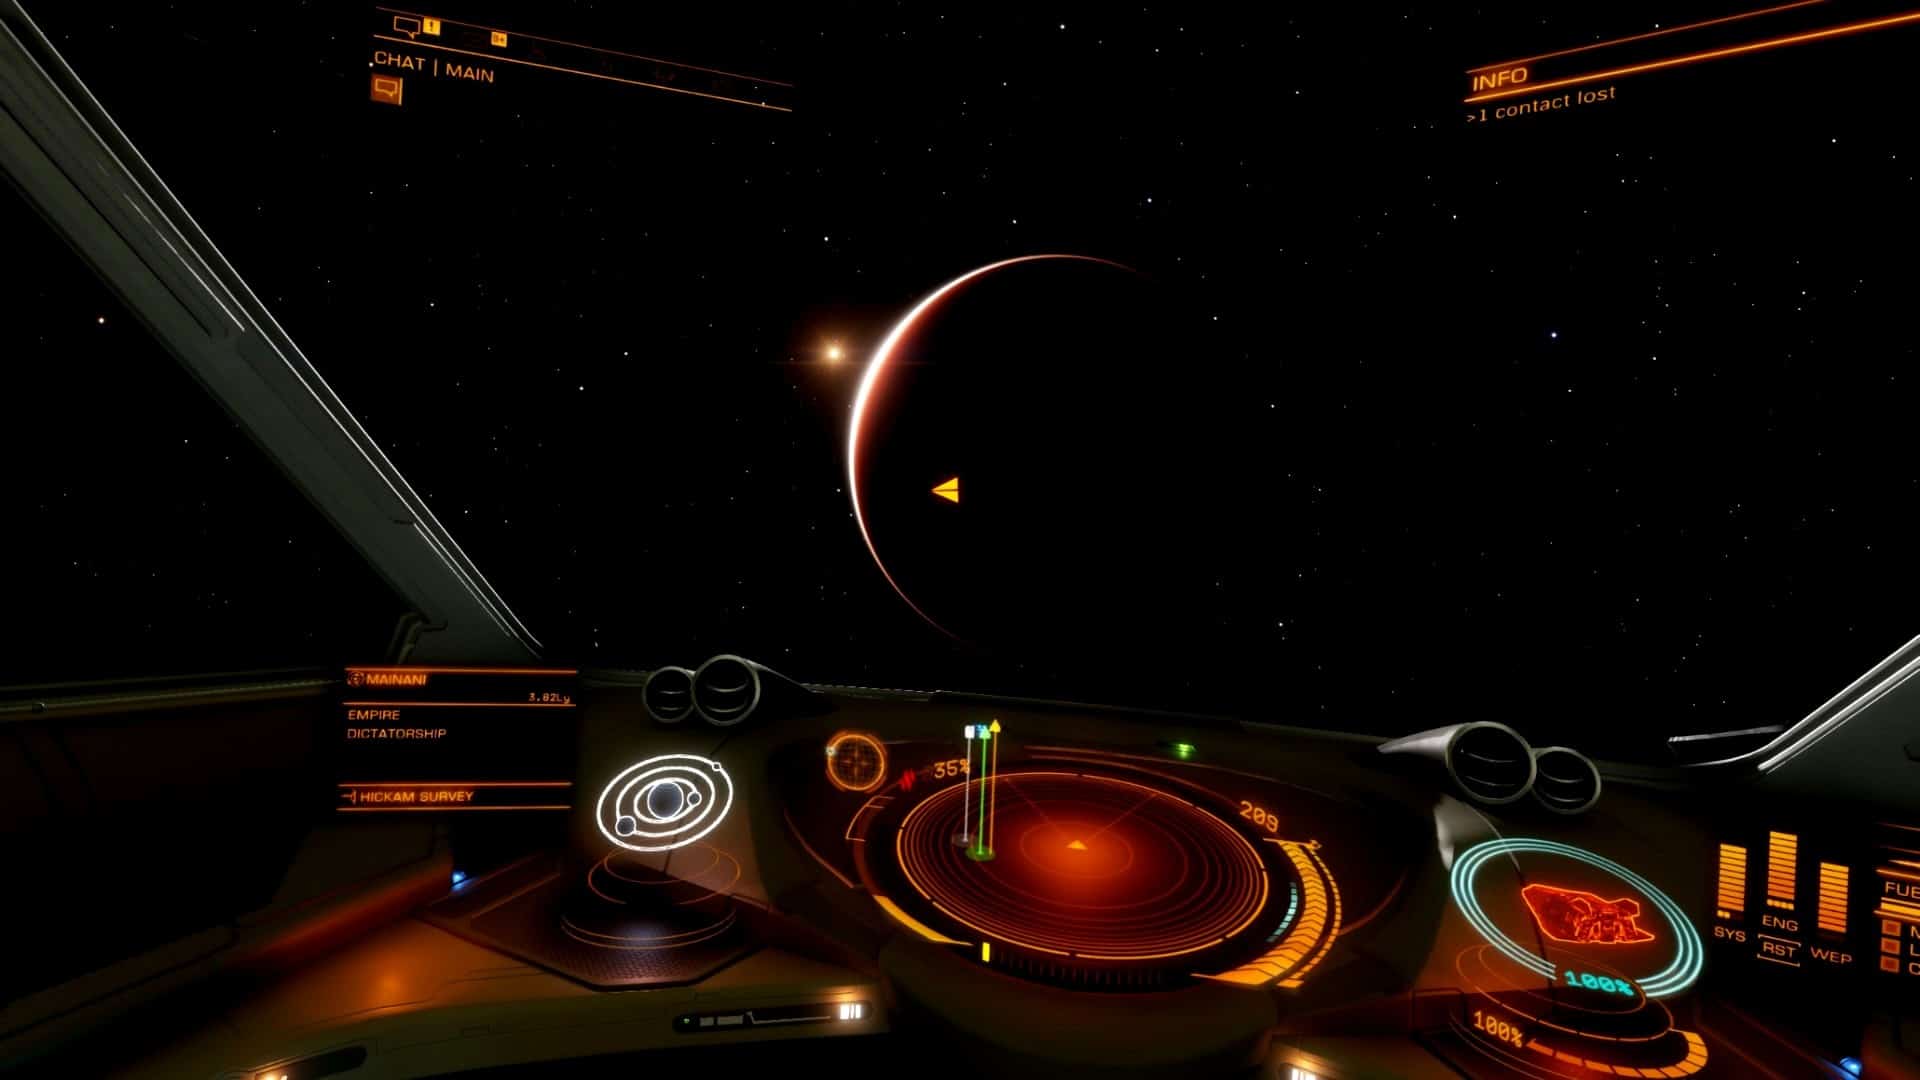 Space is not as colourful as in other space games, but there are still great sights.